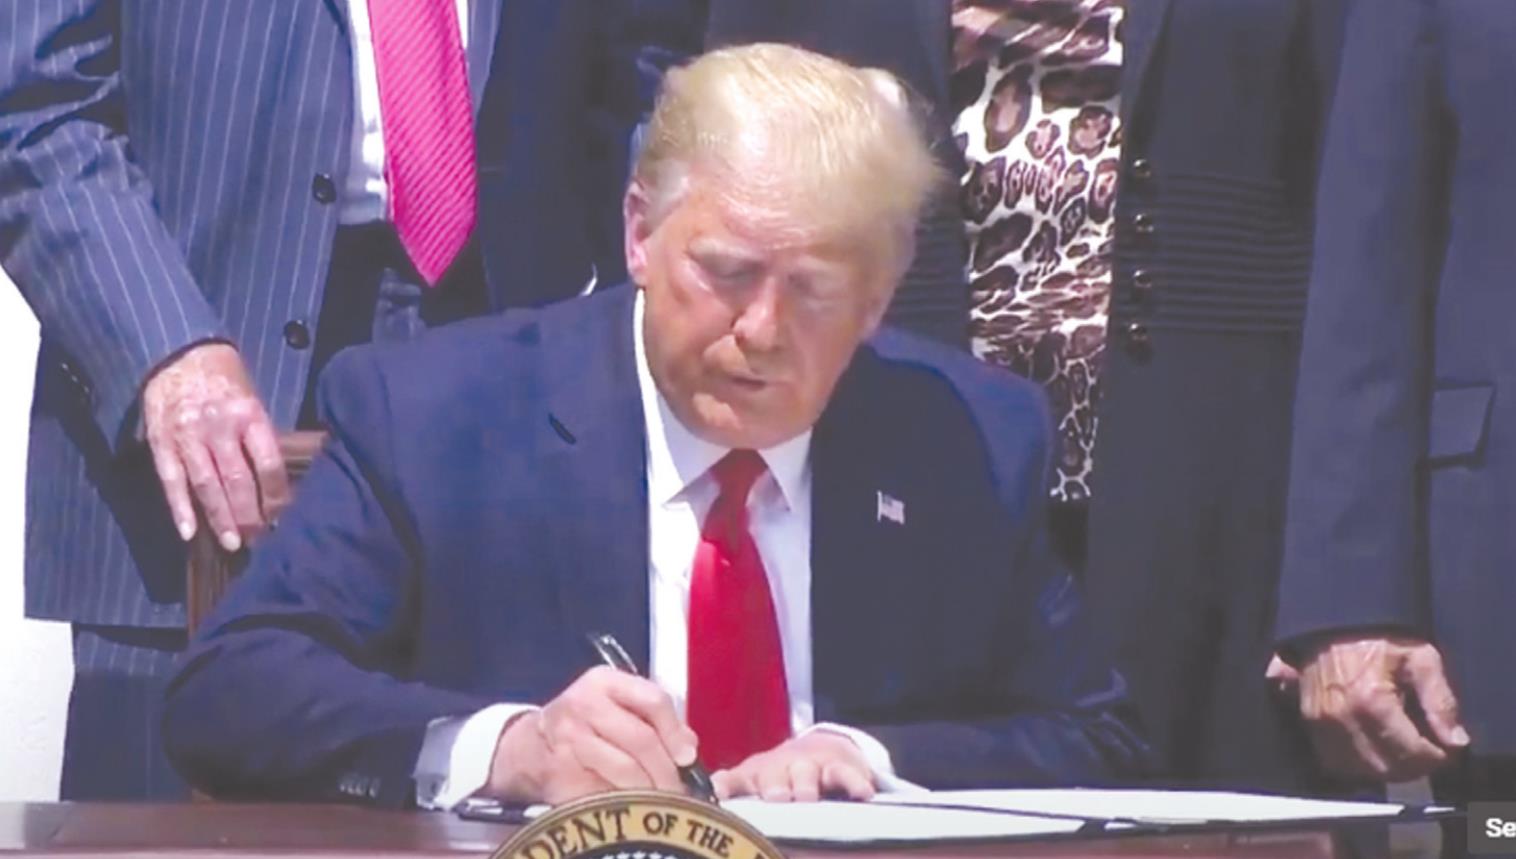 President Donald Trump signs H.R. 7010 Friday morning, which will make changes to existing legislation.Provided